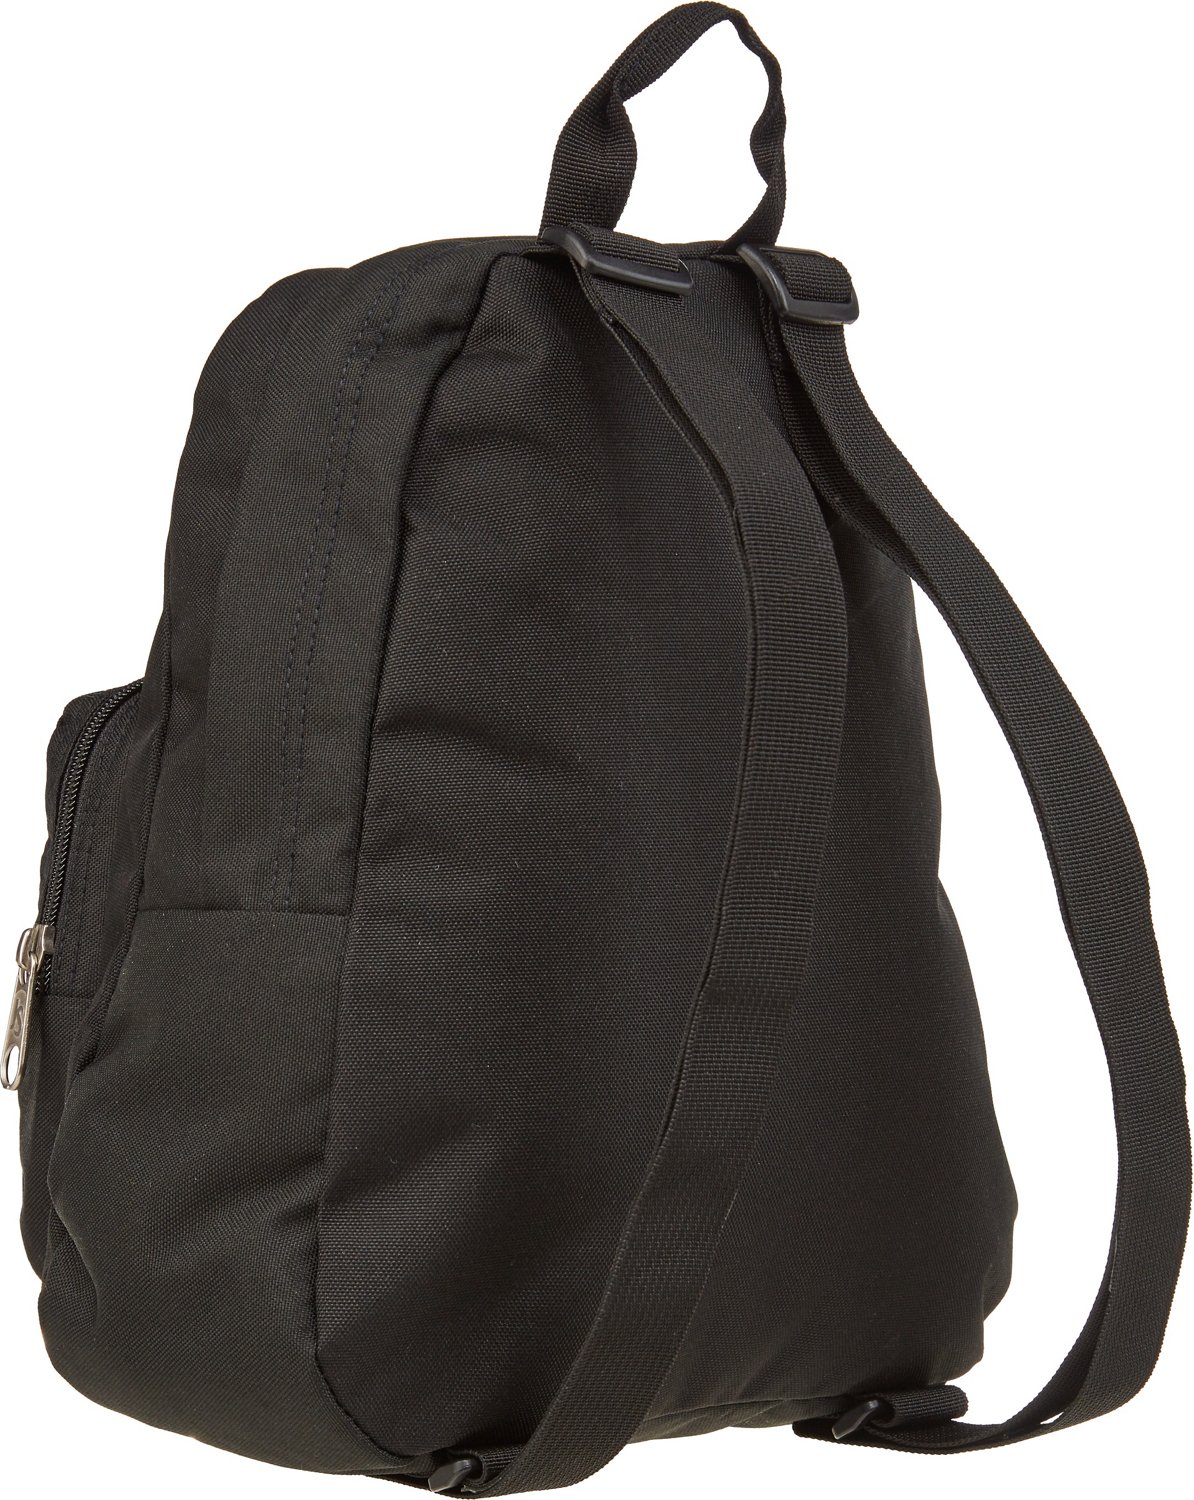 JanSport Half Pint Backpack | Free Shipping at Academy